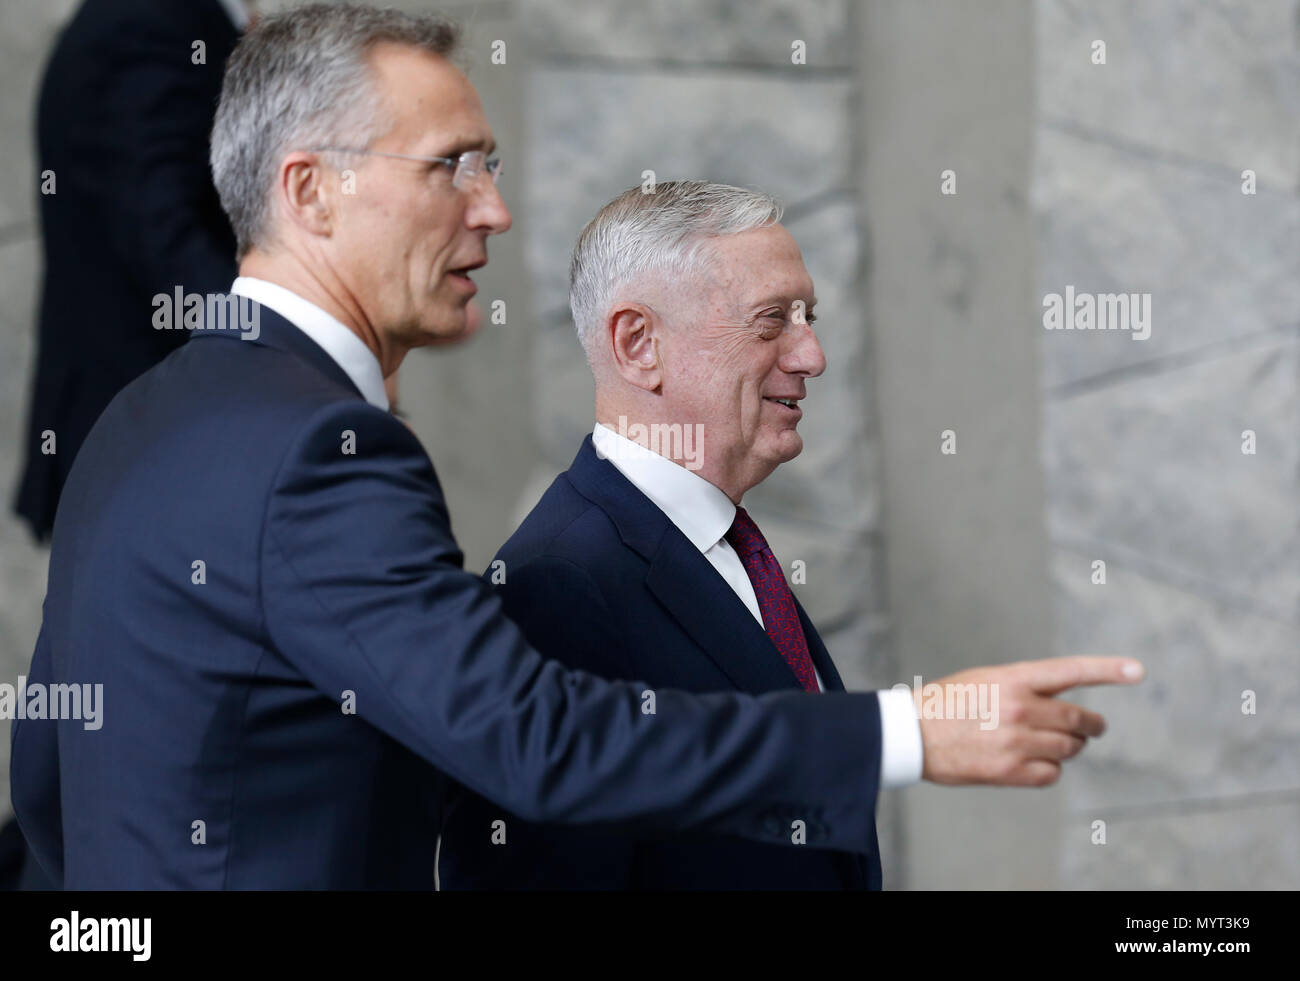 Brussels, Belgium. 7th June, 2018. NATO Secretary General Jens Stoltenberg (L) and U.S. Defense Secretary Jim Mattis attend the family photo session during a NATO defense ministers meeting at its headquarters in Brussels, Belgium, June 7, 2018. Credit: Ye Pingfan/Xinhua/Alamy Live News Stock Photo